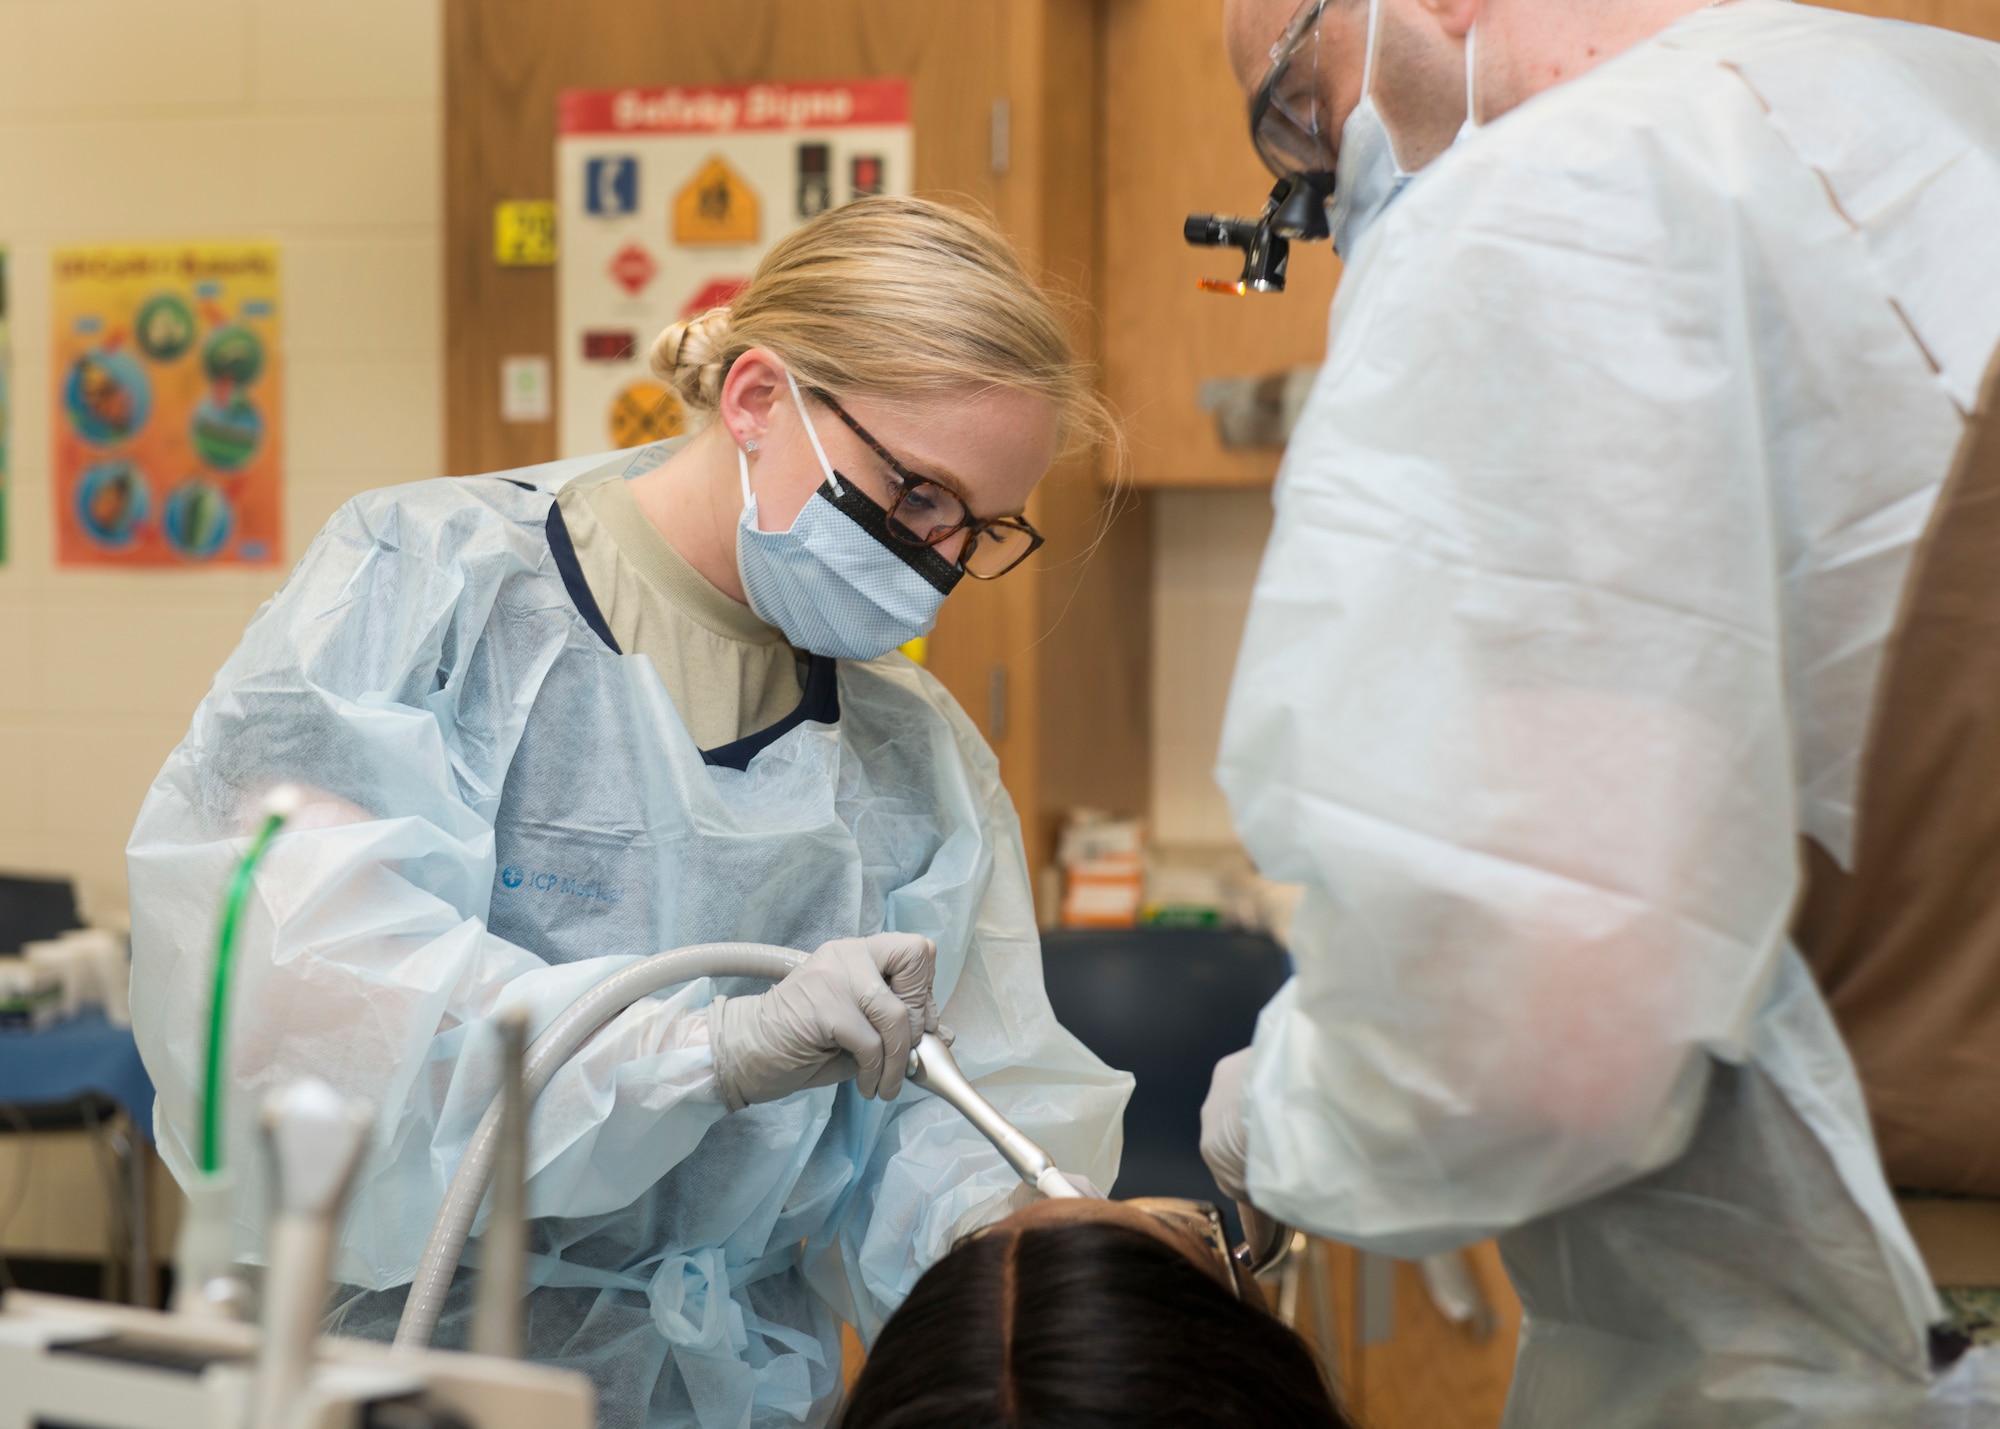 Senior Airman Haley McLane, 103rd Medical Group dental technician, assists a U.S. Navy Reserve dentist during a procedure at Louisville Academy, Louisville, Ga. during East Central Georgia Innovative Readiness Training June 19, 2019. East Central Georgia IRT is a civilian-military collaboration intended to build on mutually beneficial parnterships between U.S. communities and the Department of Defense to meet the training and readiness requirements for Active, Guard, and Reserve Service Members and units while addressing community health needs. (U.S. Air National Guard Photo by Staff Sgt. Steven Tucker)